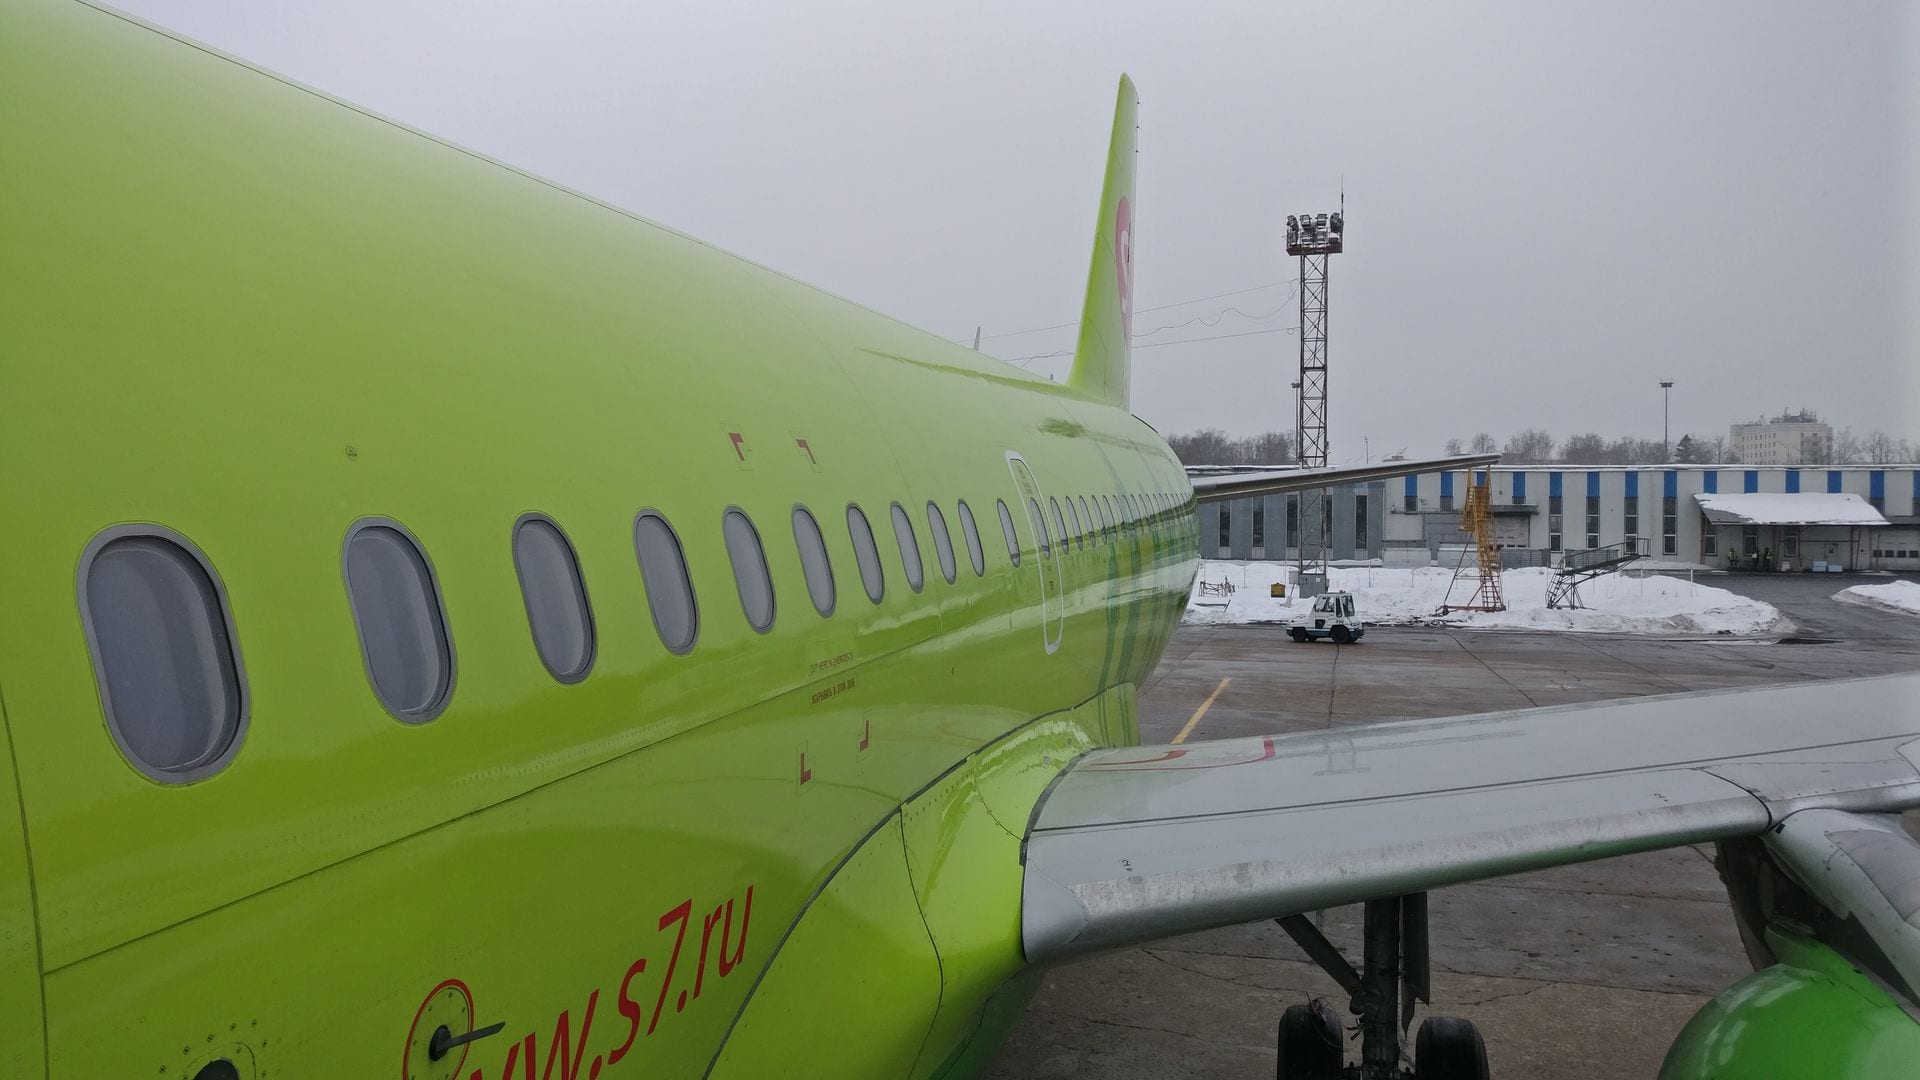 S7 Airlines Airbus A320